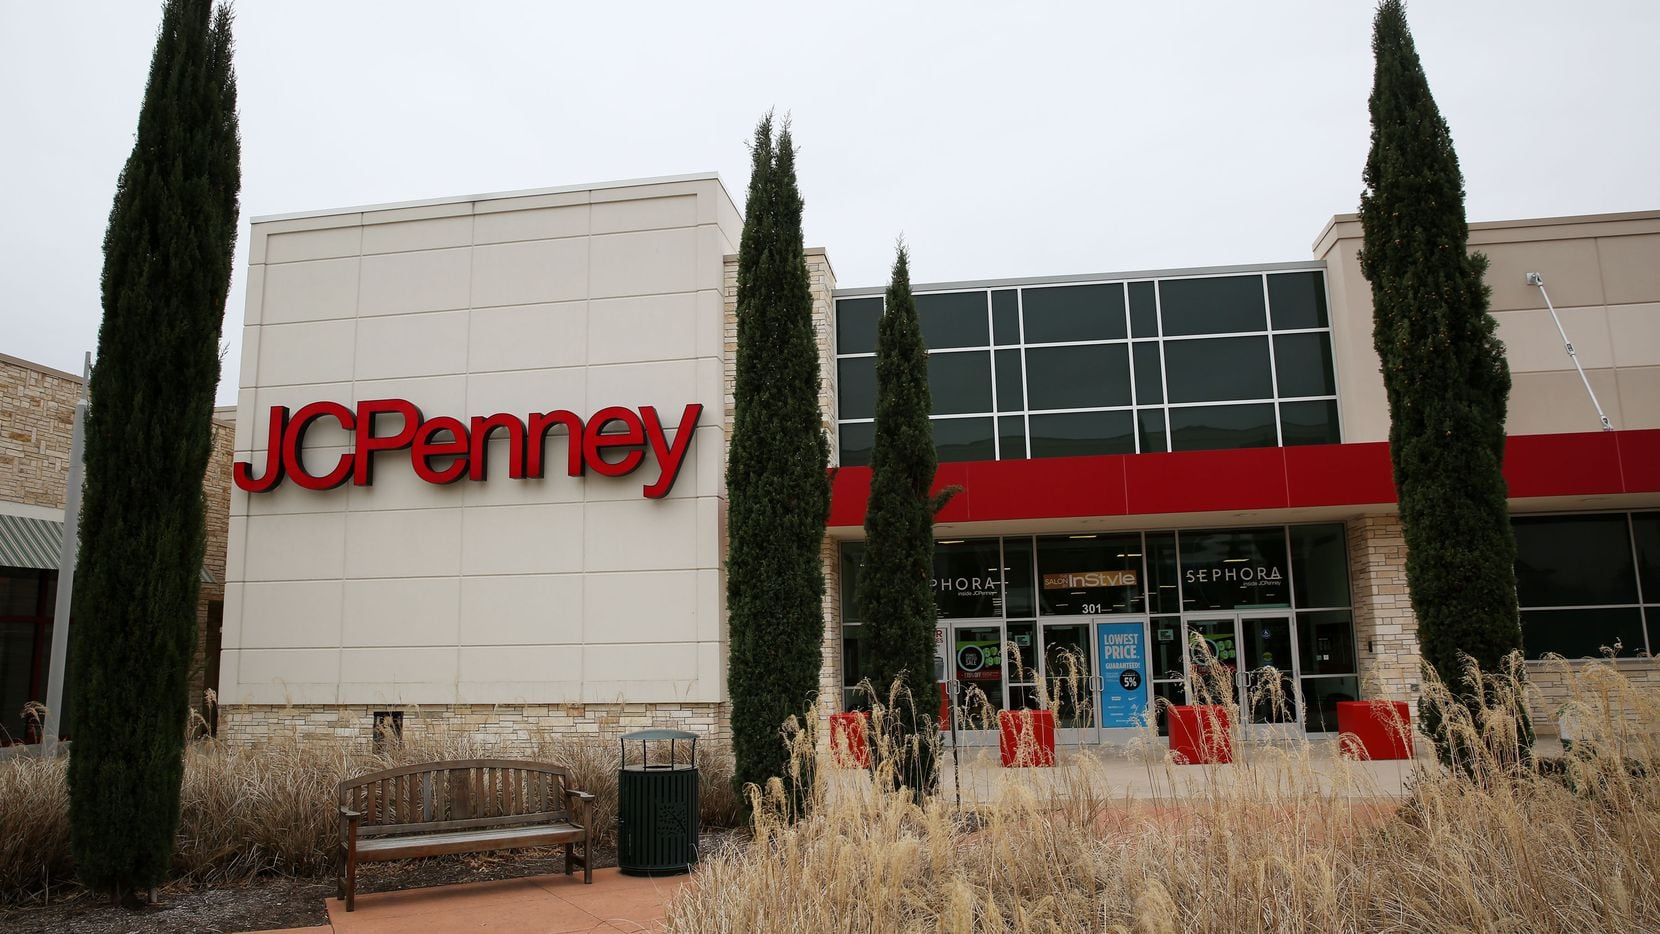 Outside the JCPenney department store at The Village at Fairview shopping center in Fairview.